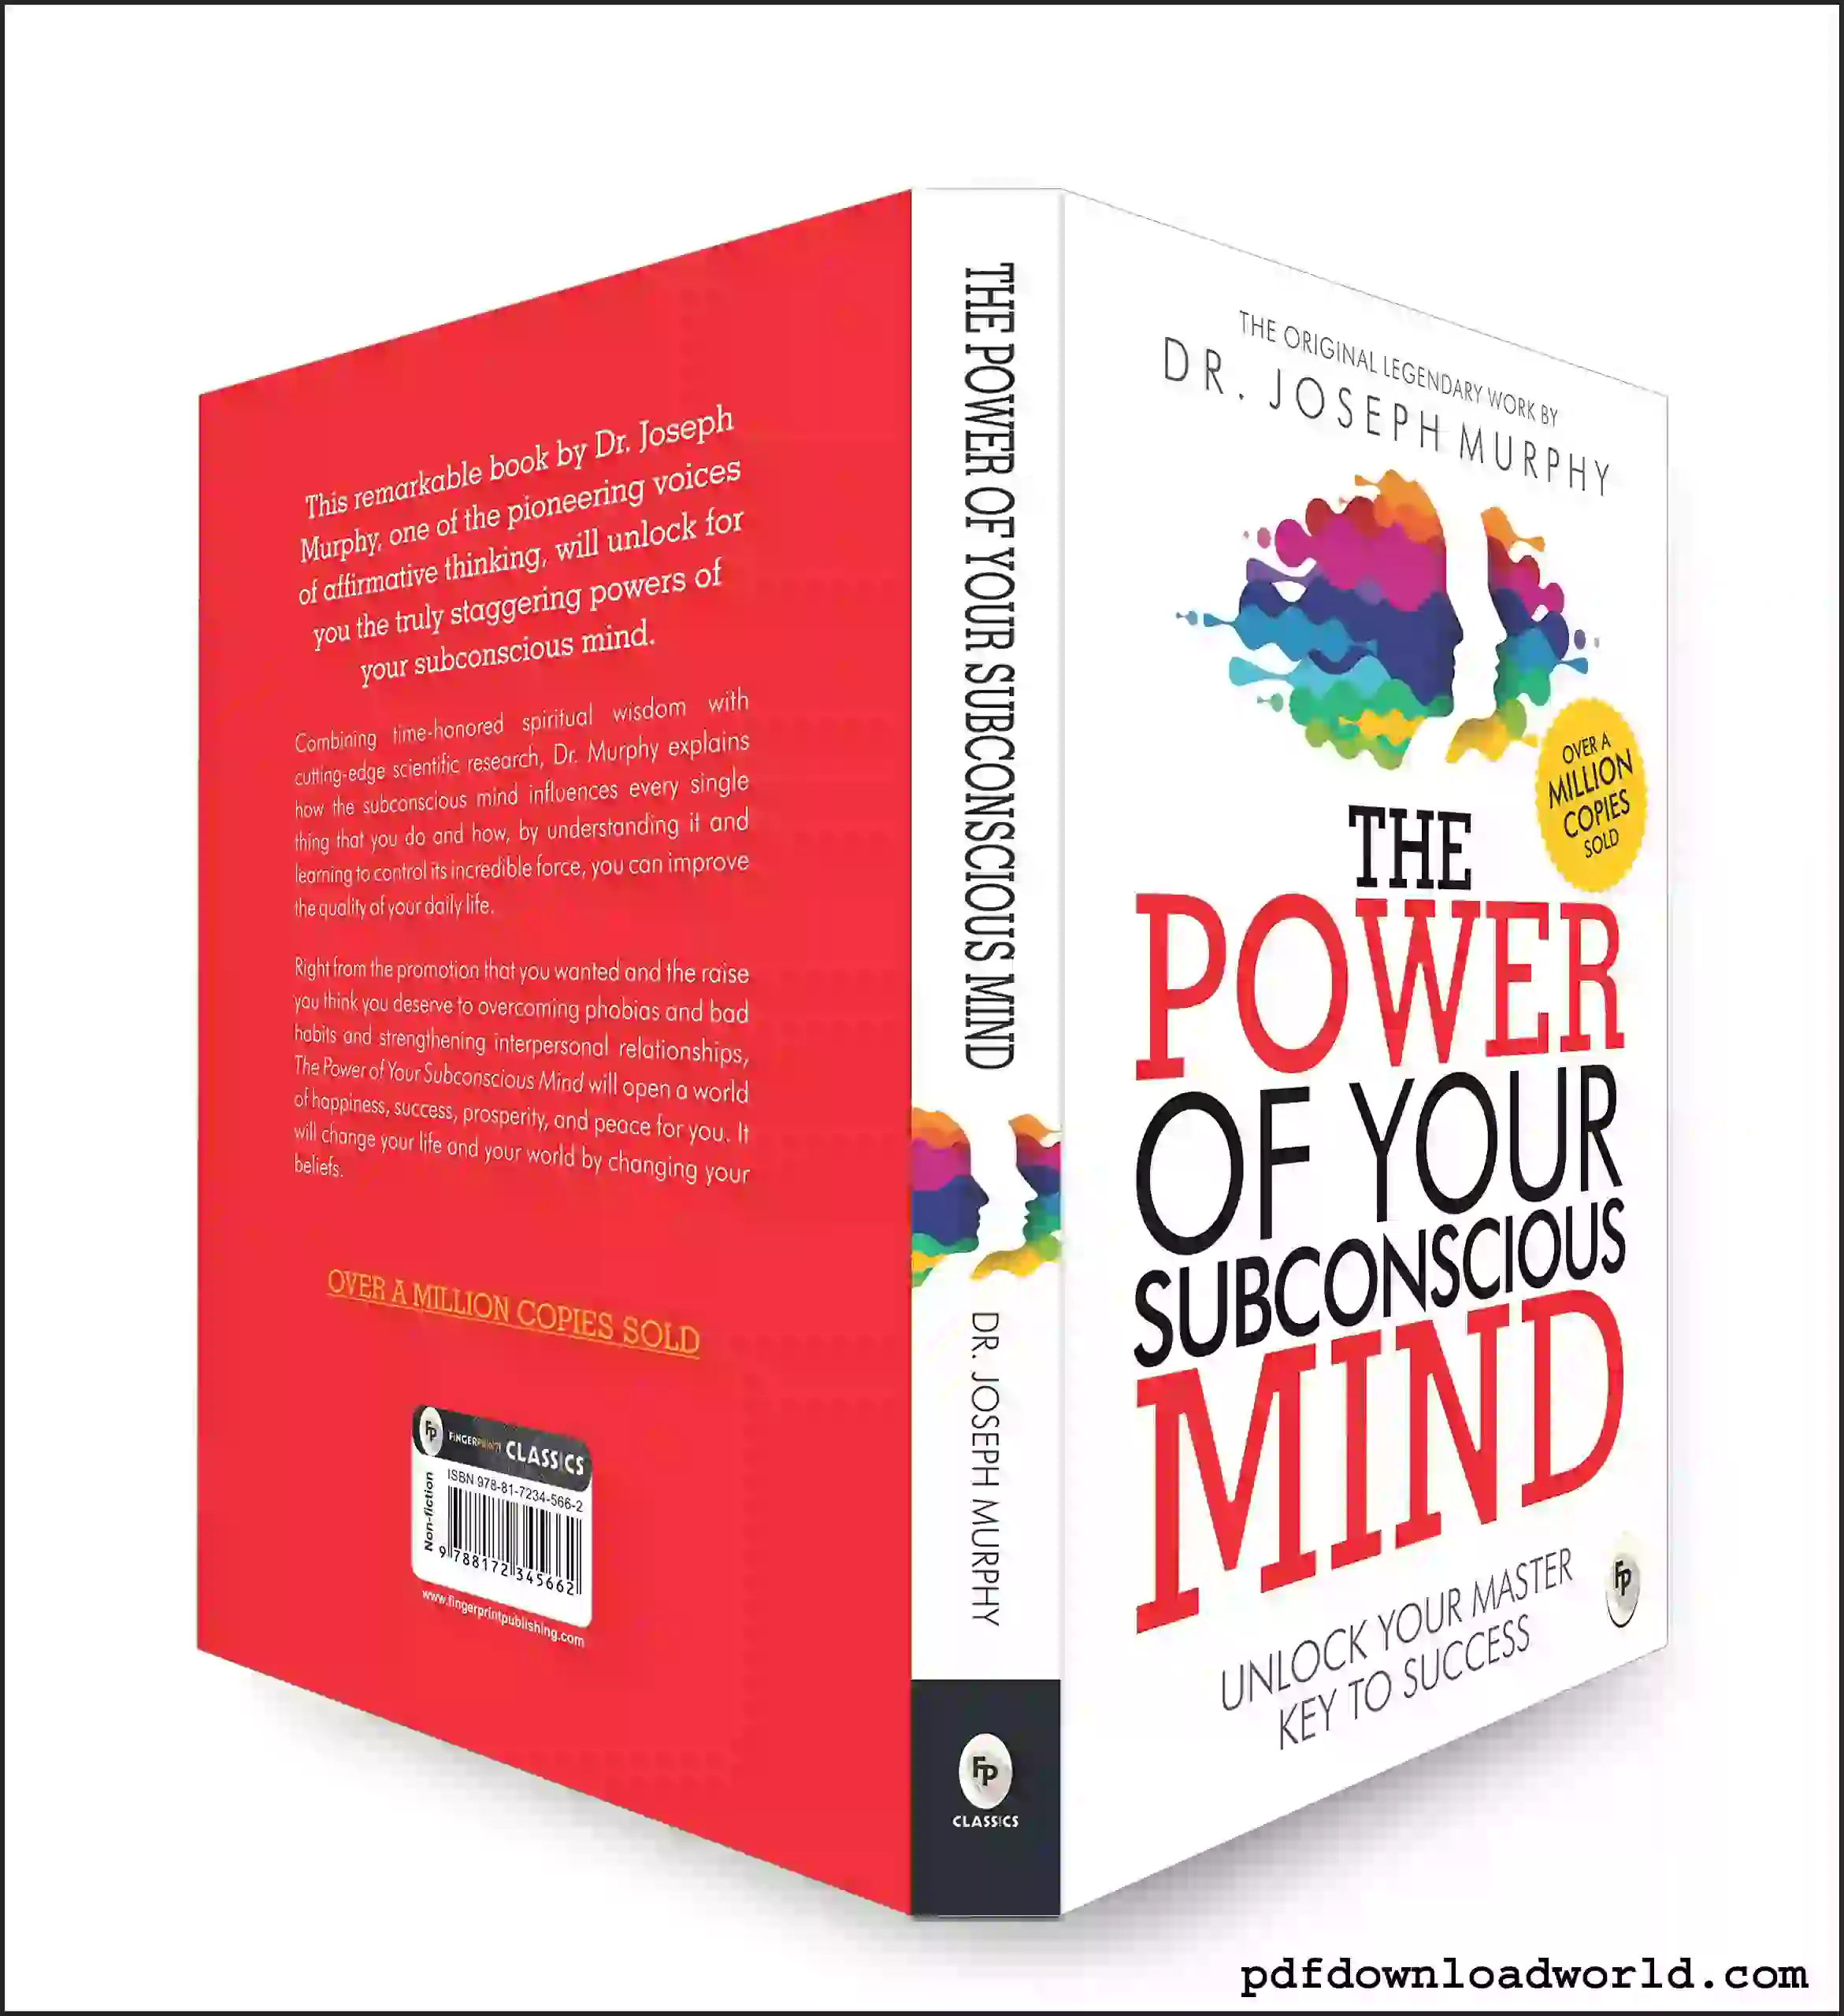 The Power Of Your Subconscious Mind In English PDF, The Power Of Your Subconscious Mind PDF, The Power Of Your Subconscious Mind PDF Download, Power Of Subconscious Mind Book PDF, Power Of Your Subconscious Mind PDF,The Power Of Your Subconscious Mind PDF